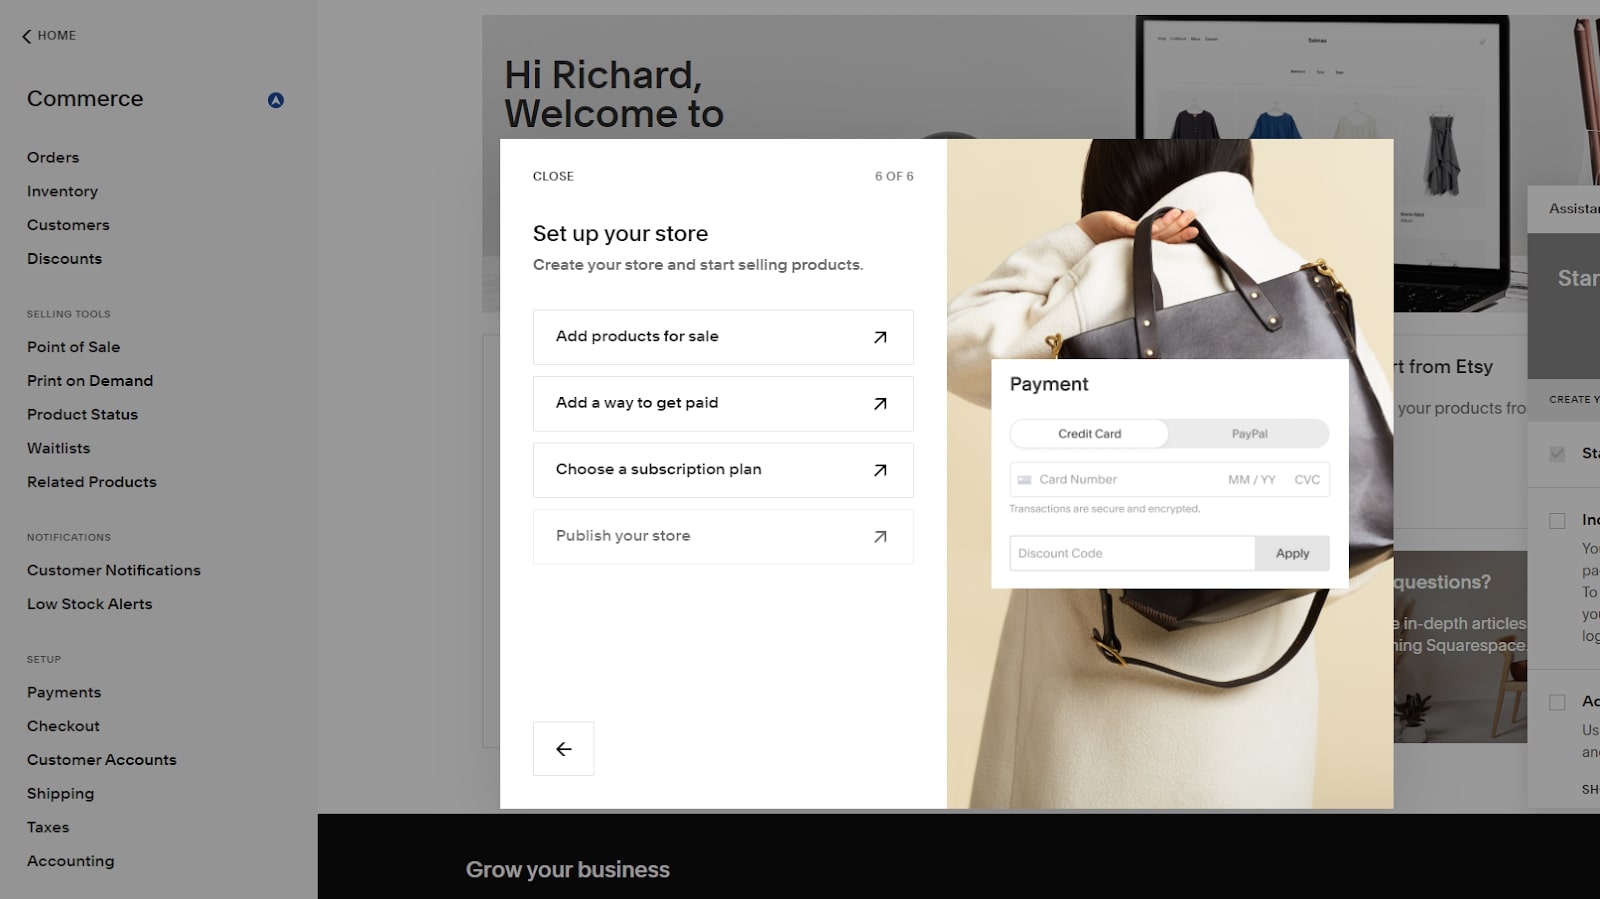 Squarespace's onboarding wizards